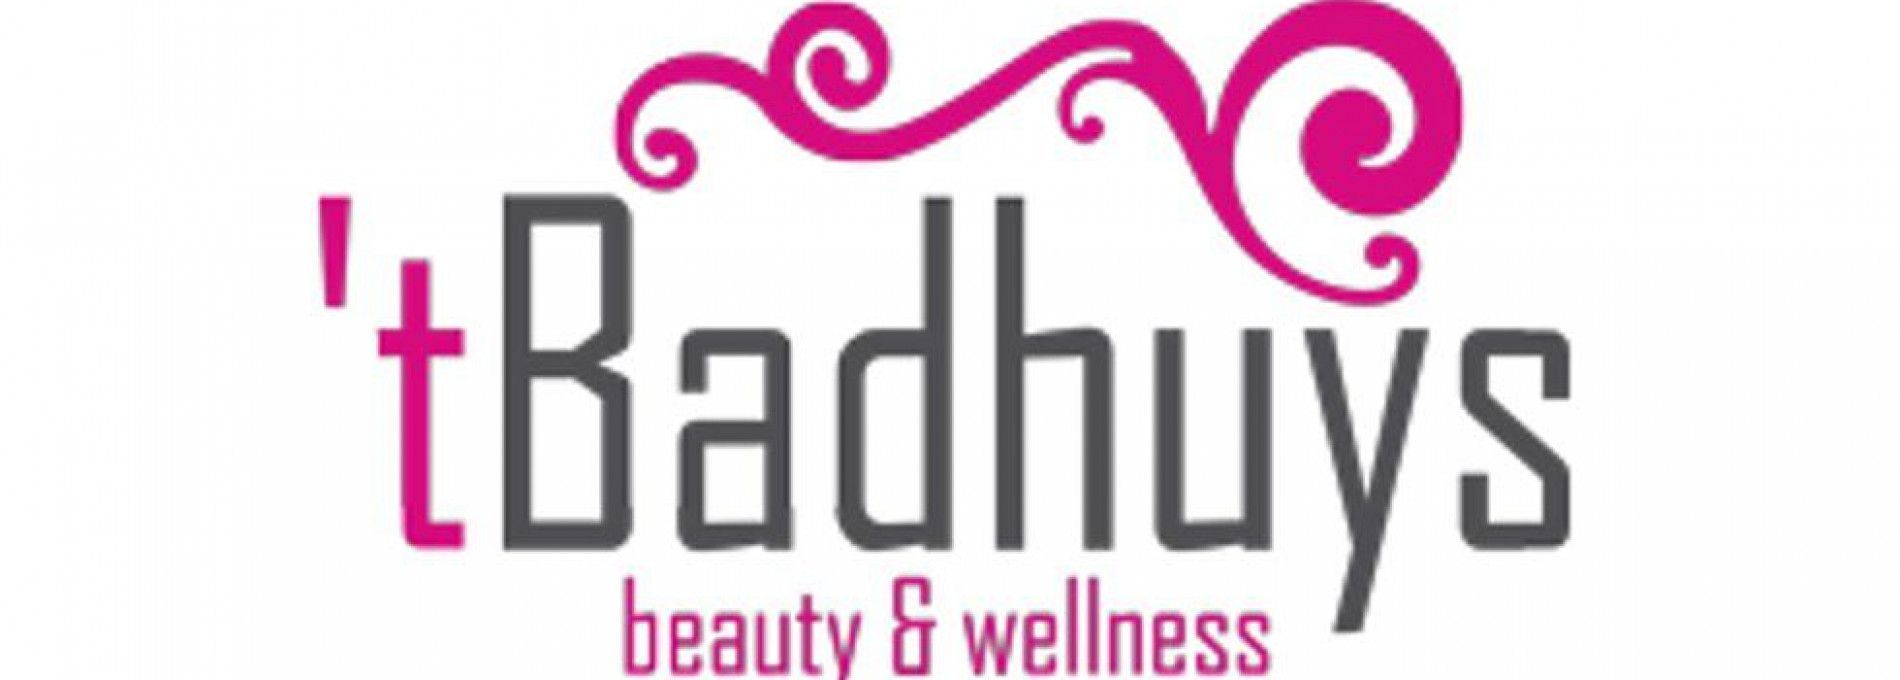 Beauty & wellness 't Badhuys - Tourist Information Centre 